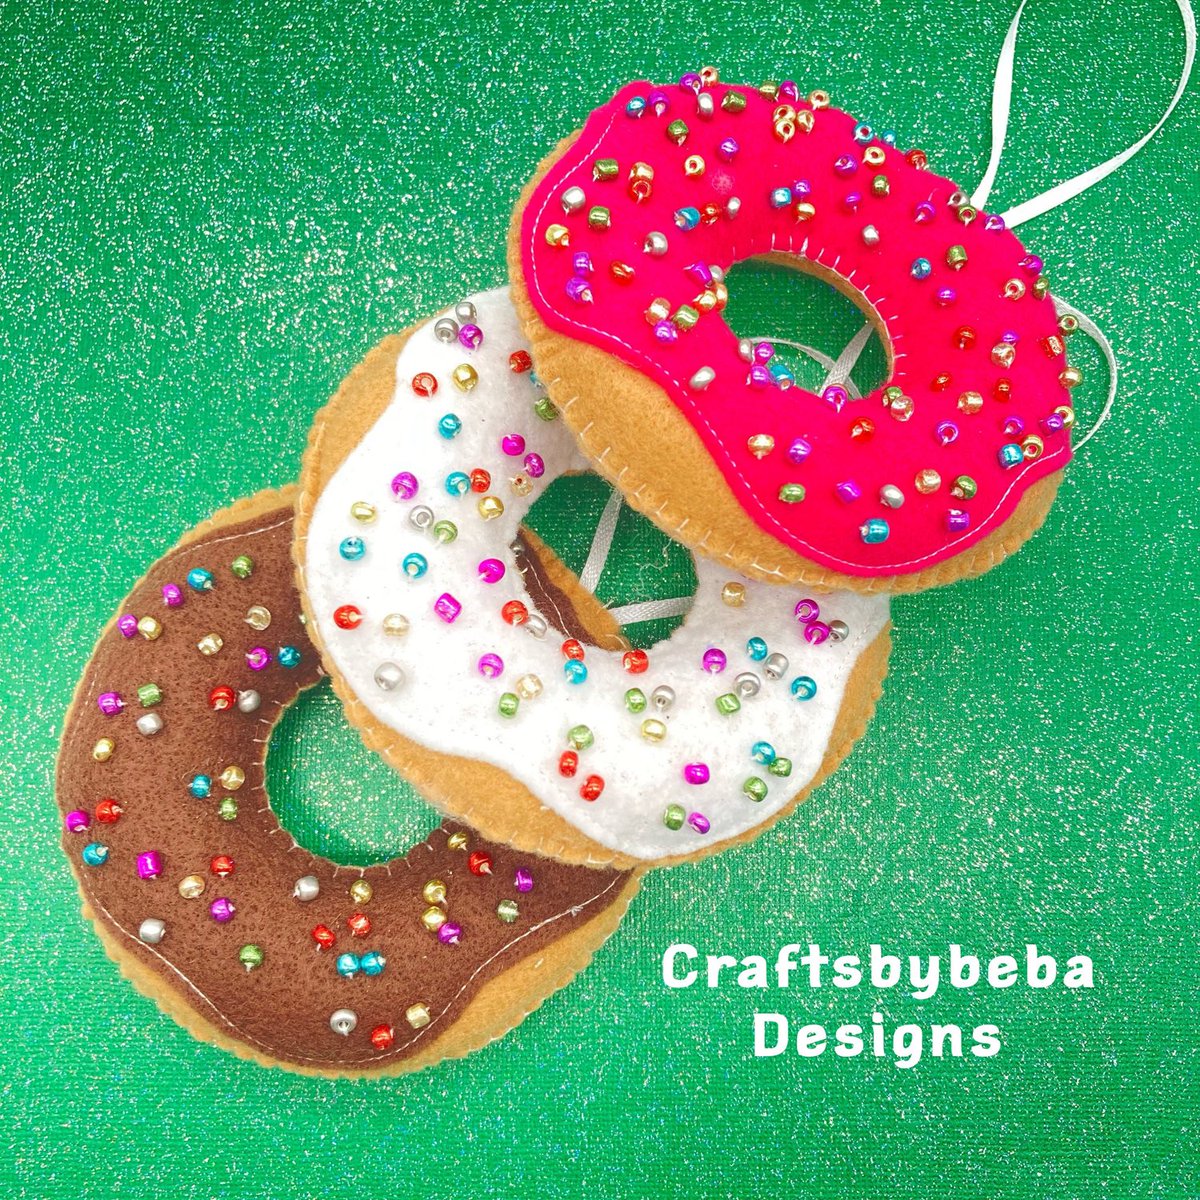 Excited to share this item from my #etsy shop: Donuts Christmas Ornaments / Set 3 Ornaments / Felt Donuts Hanging Ornaments / Christmas Ornaments / Whimsical Xmas Donut’s etsy.me/3HMgzbJ
#etsyseller #etsystore #donuts #feltdonuts #christmasornaments #xmastreedecor #share